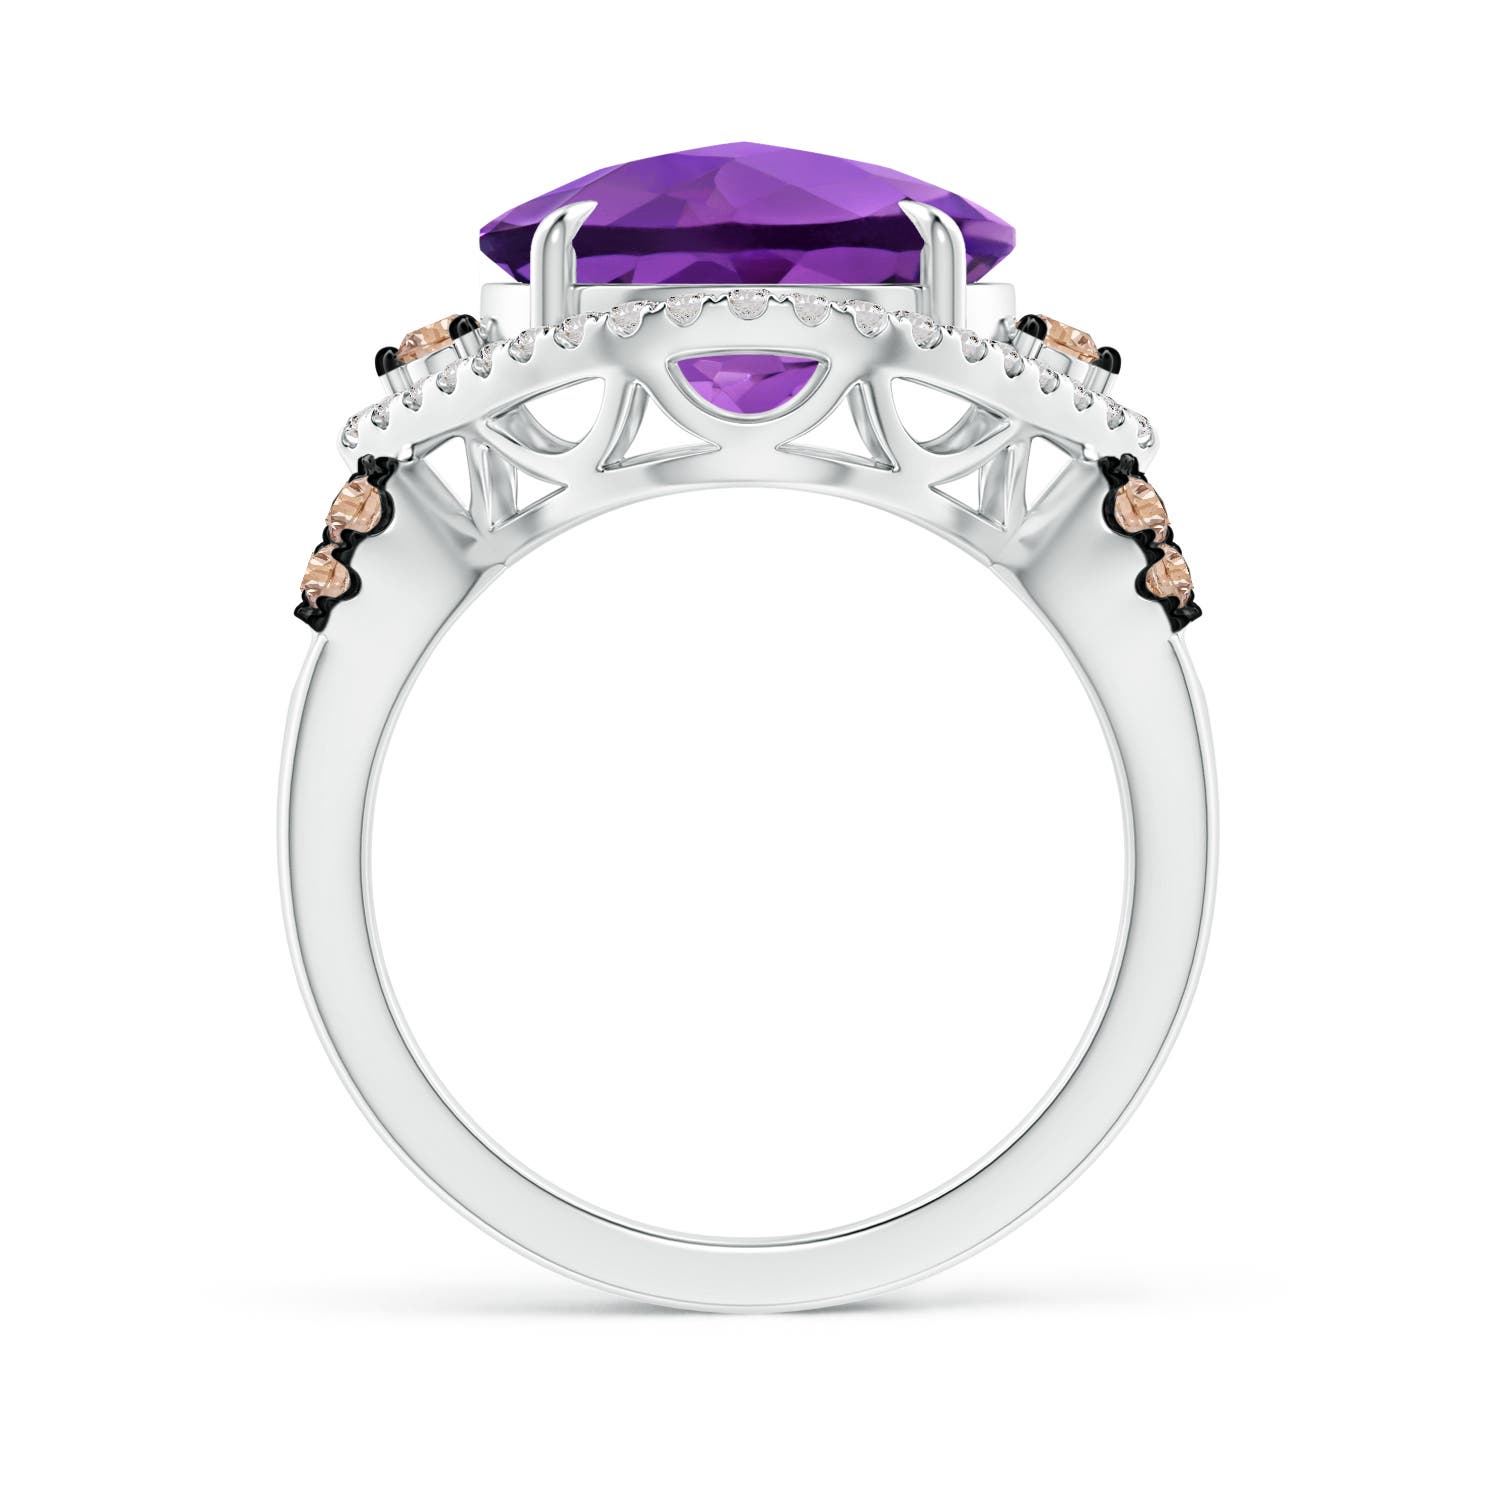 AA - Amethyst / 6.4 CT / 14 KT White Gold